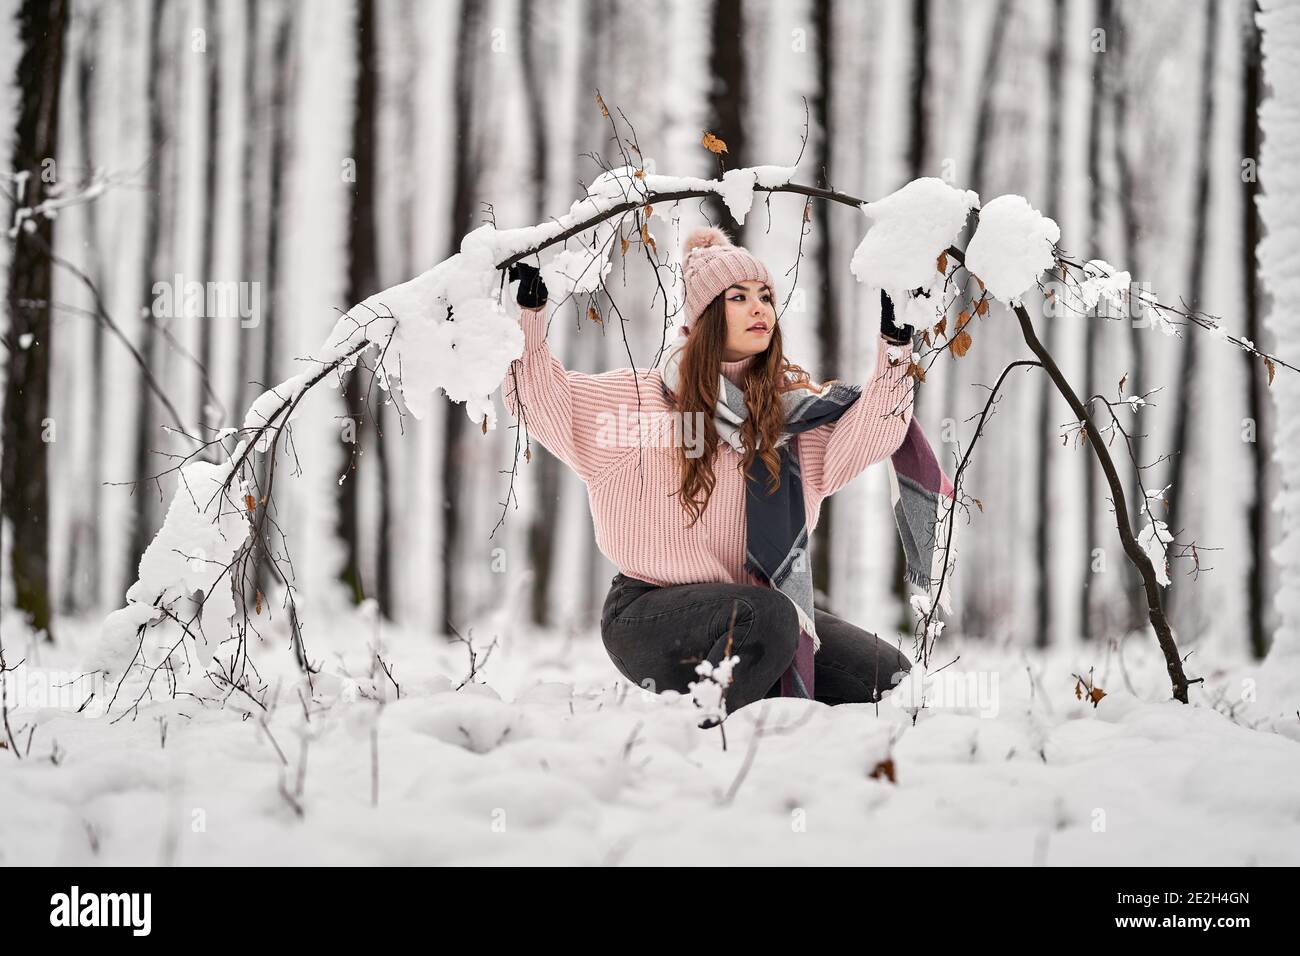 Winter Snow Woman Having Fun Outside. Cute Happy Smiling Young Mixed Race  Asian Caucasian Woman Playful In The Snow. Stock Photo, Picture and Royalty  Free Image. Image 11404499.